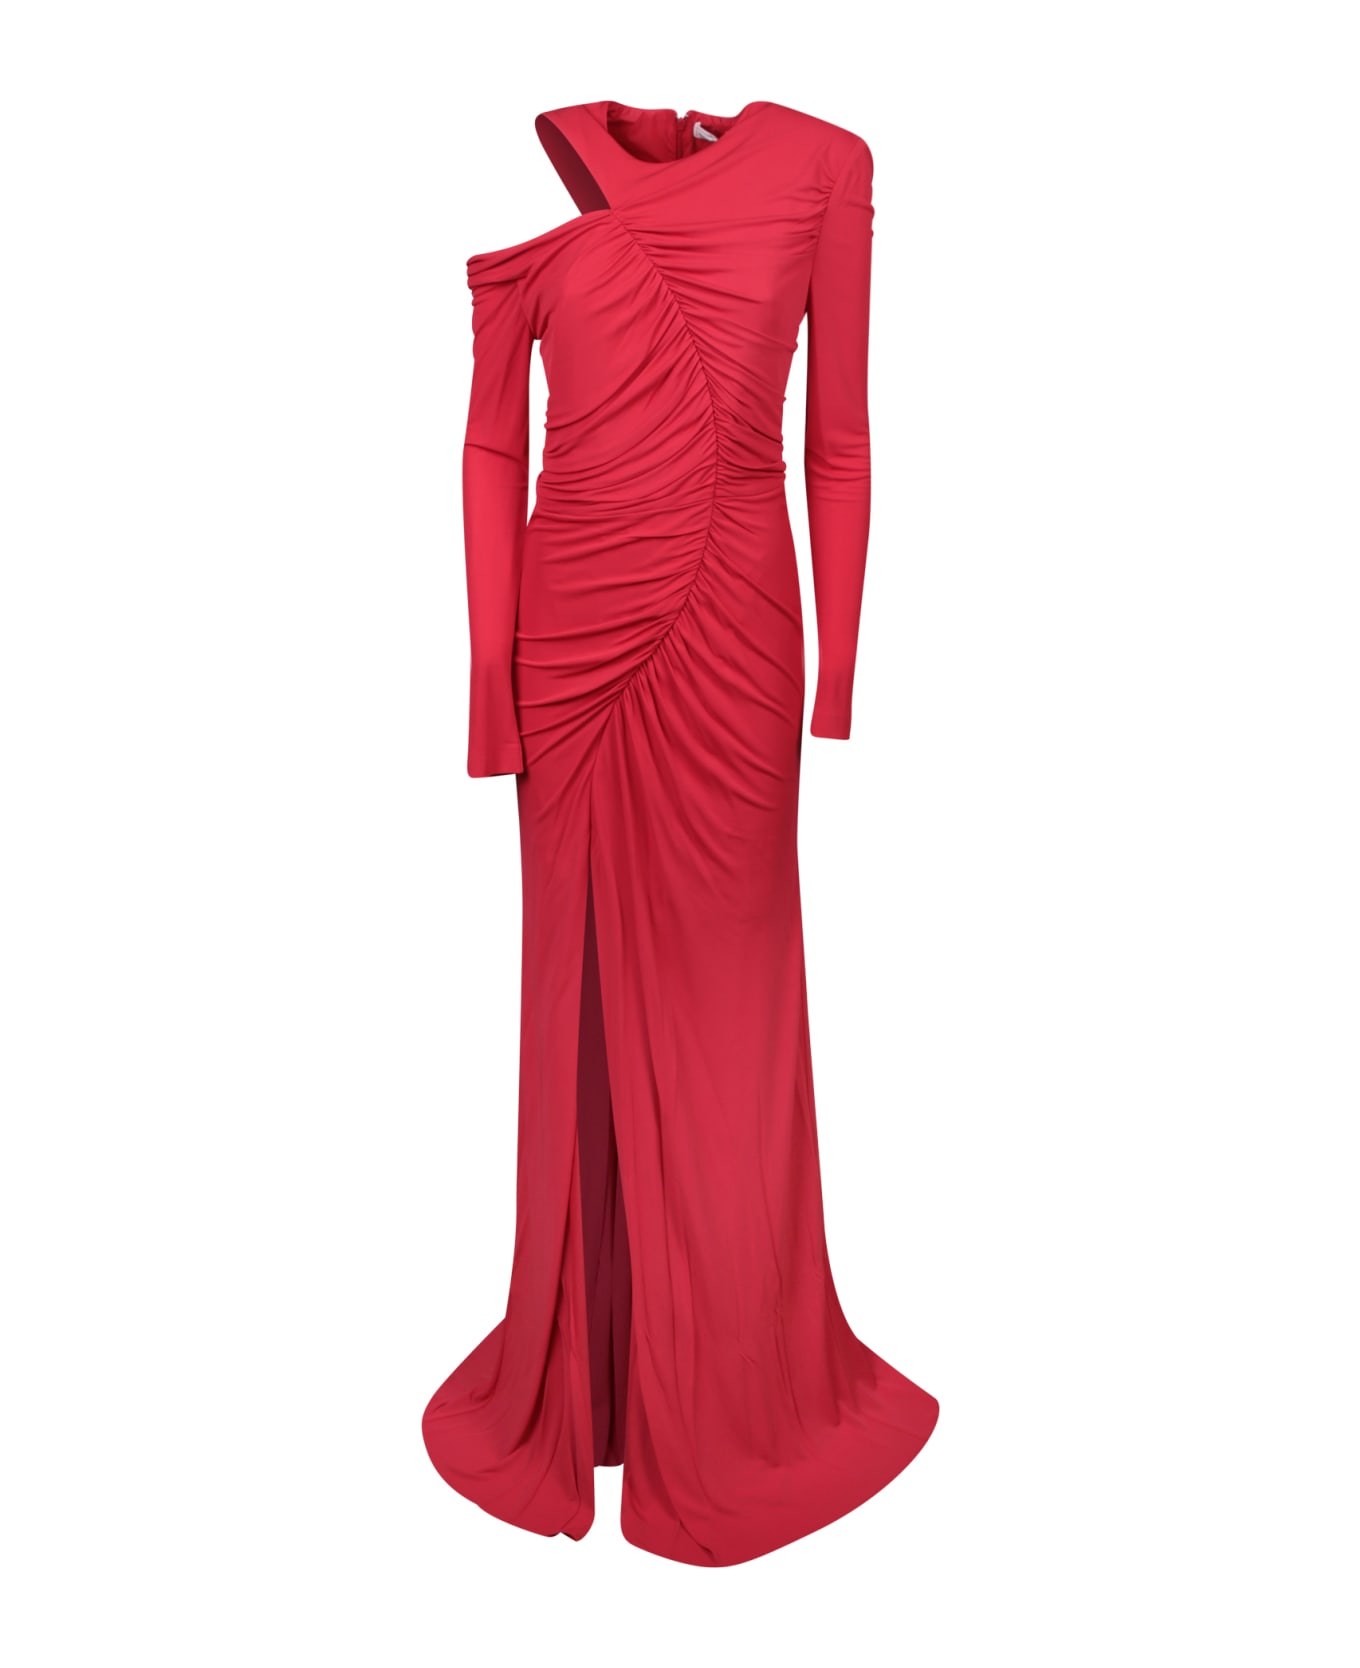 Alexander McQueen Ruched Red Dress - Red ワンピース＆ドレス